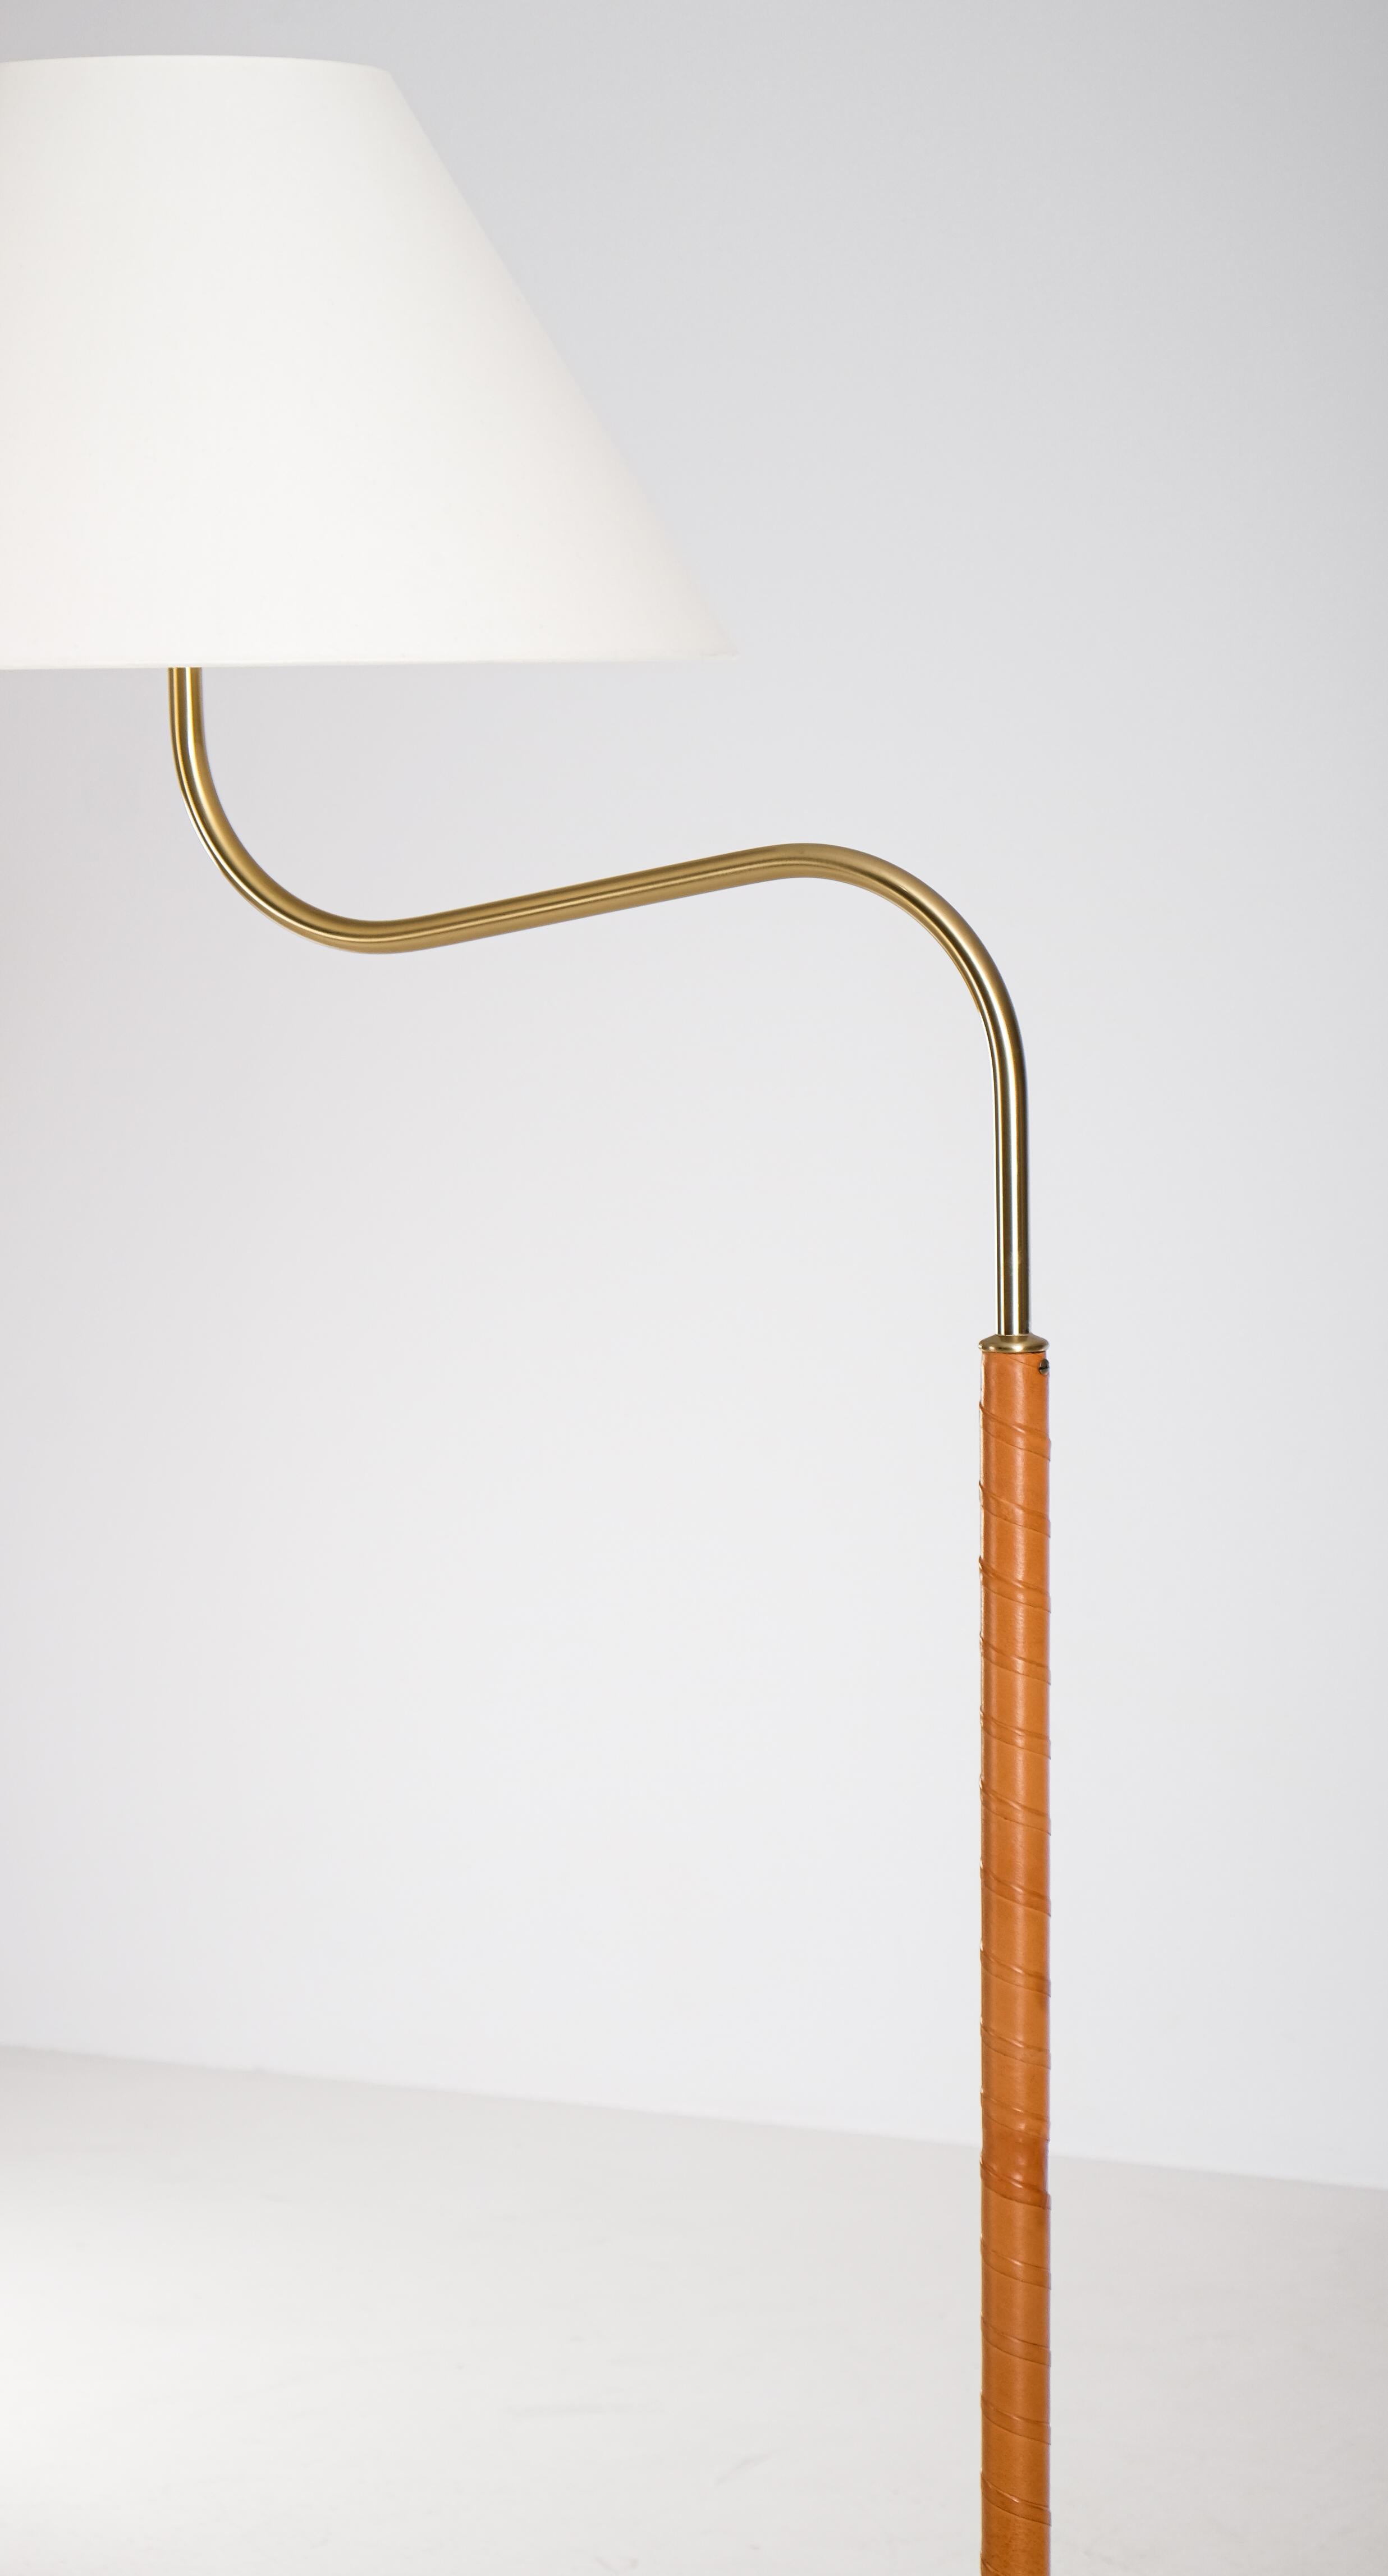 Mid-20th Century 'Large Camel' Floor Lamp by Josef Frank, Sweden For Sale